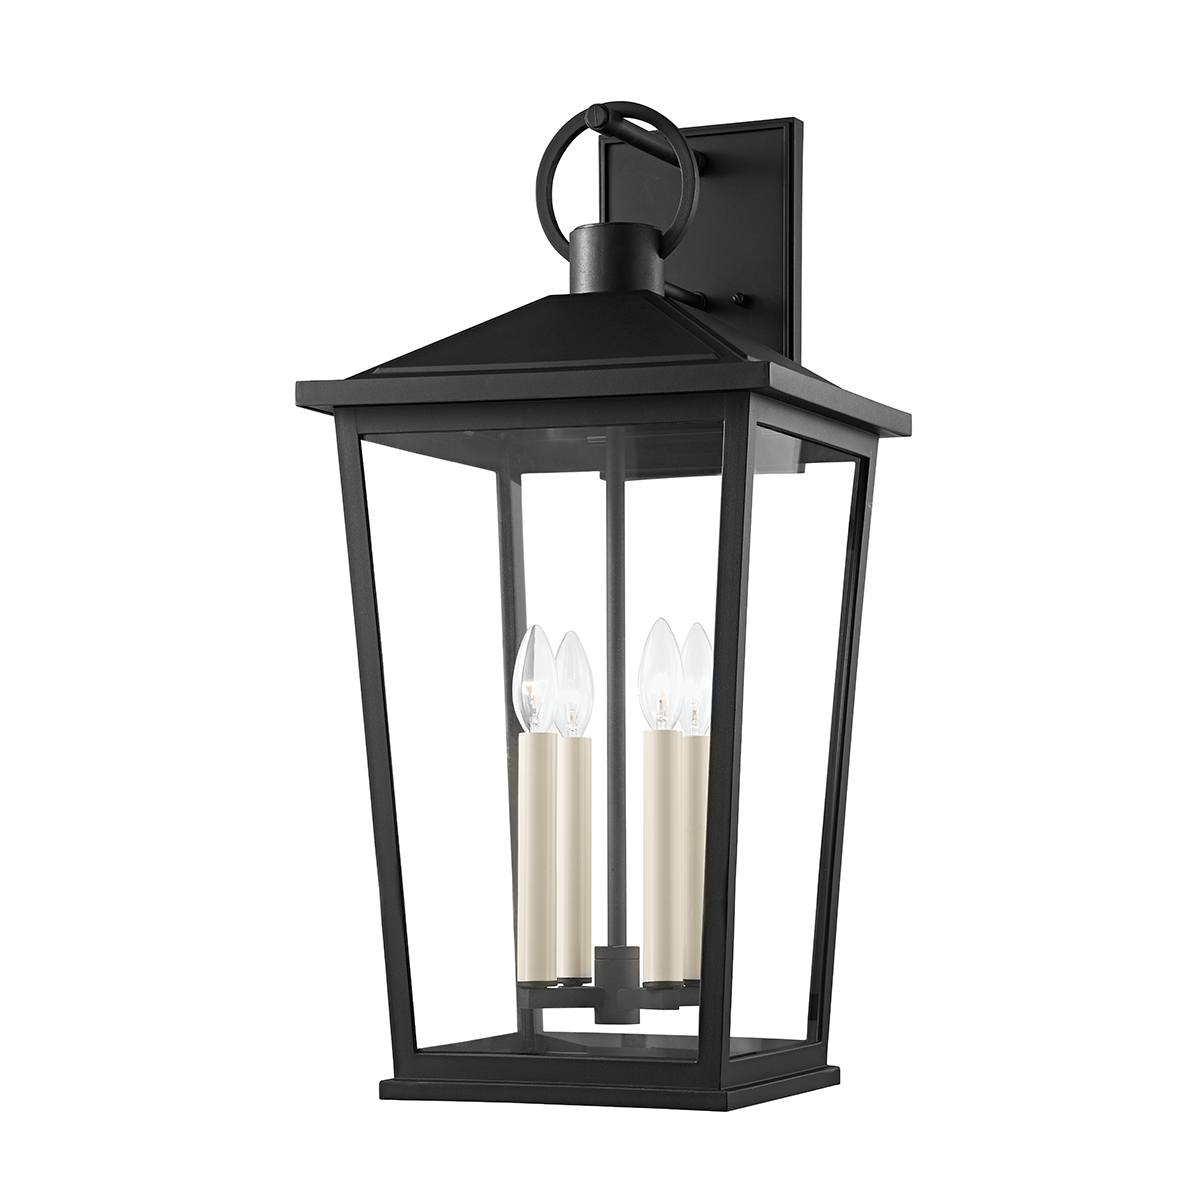 Troy SOREN 4 LIGHT EXTRA LARGE EXTERIOR WALL SCONCE B8904 Outdoor l Wall Troy Lighting   